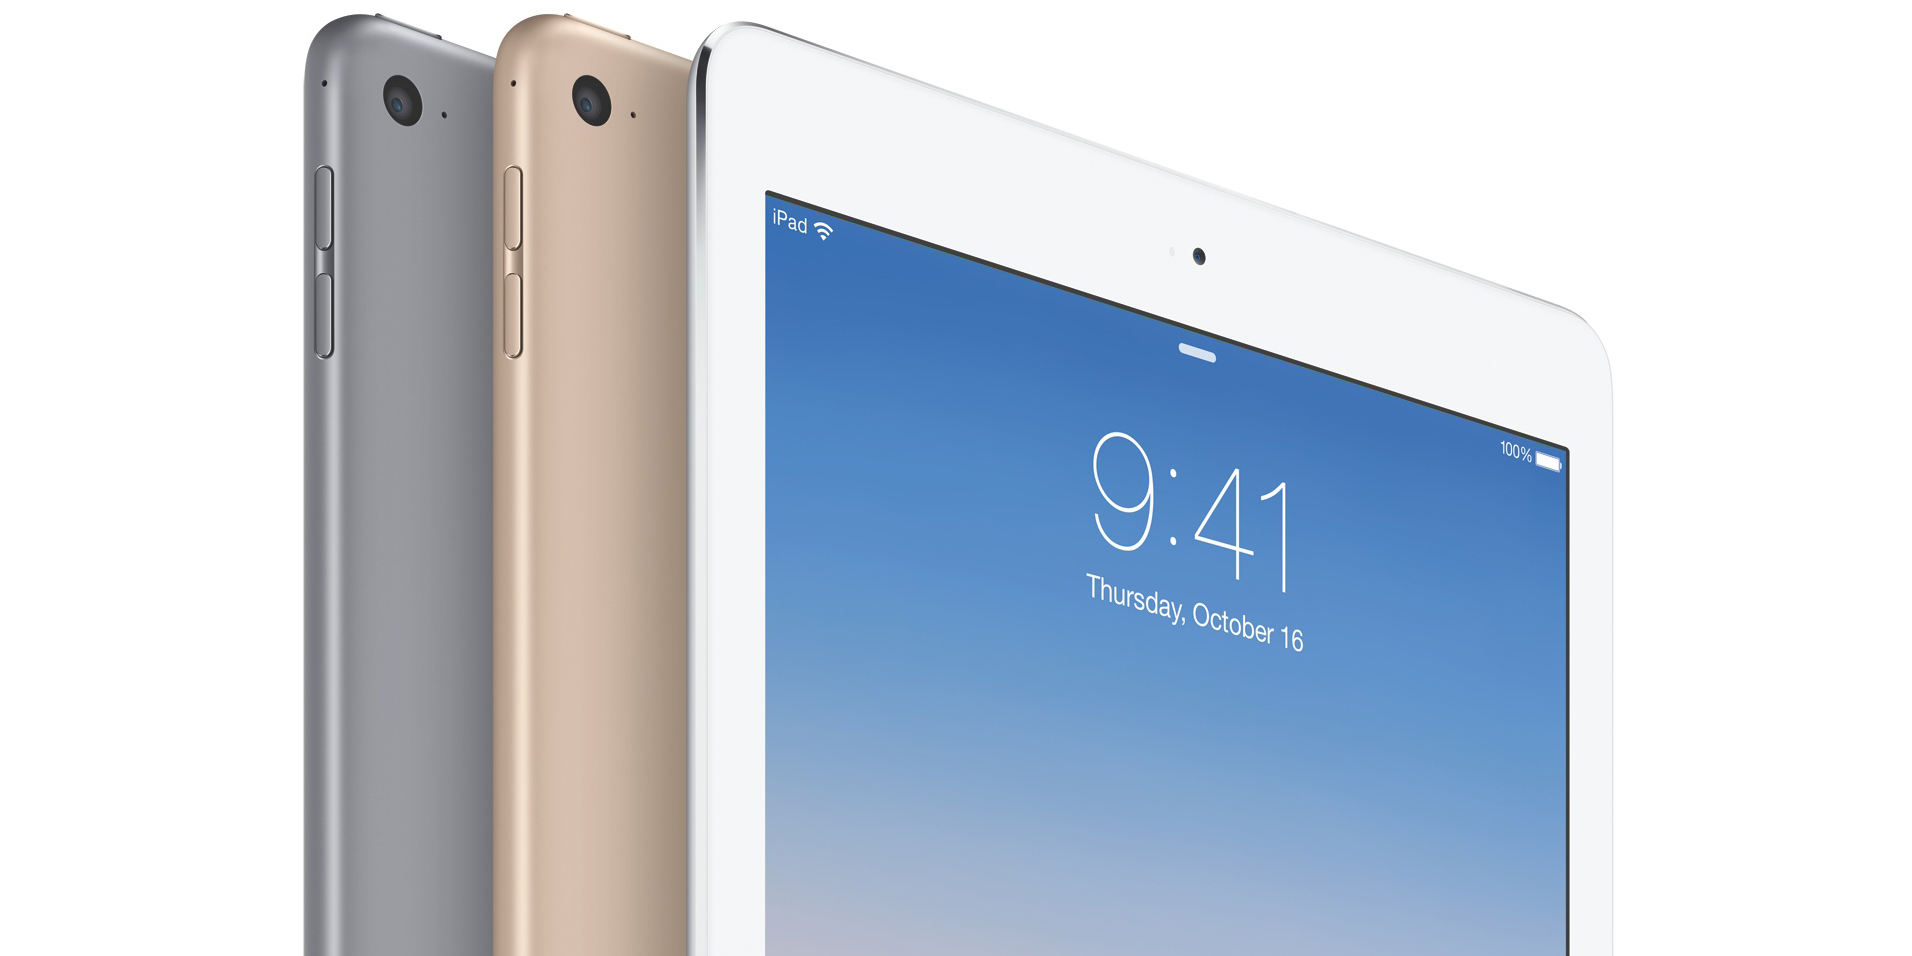 Get Your Hands On An Ipad Air 2 Wi Fi 16gb In All Colors For Only 300 Shipped 9to5toys